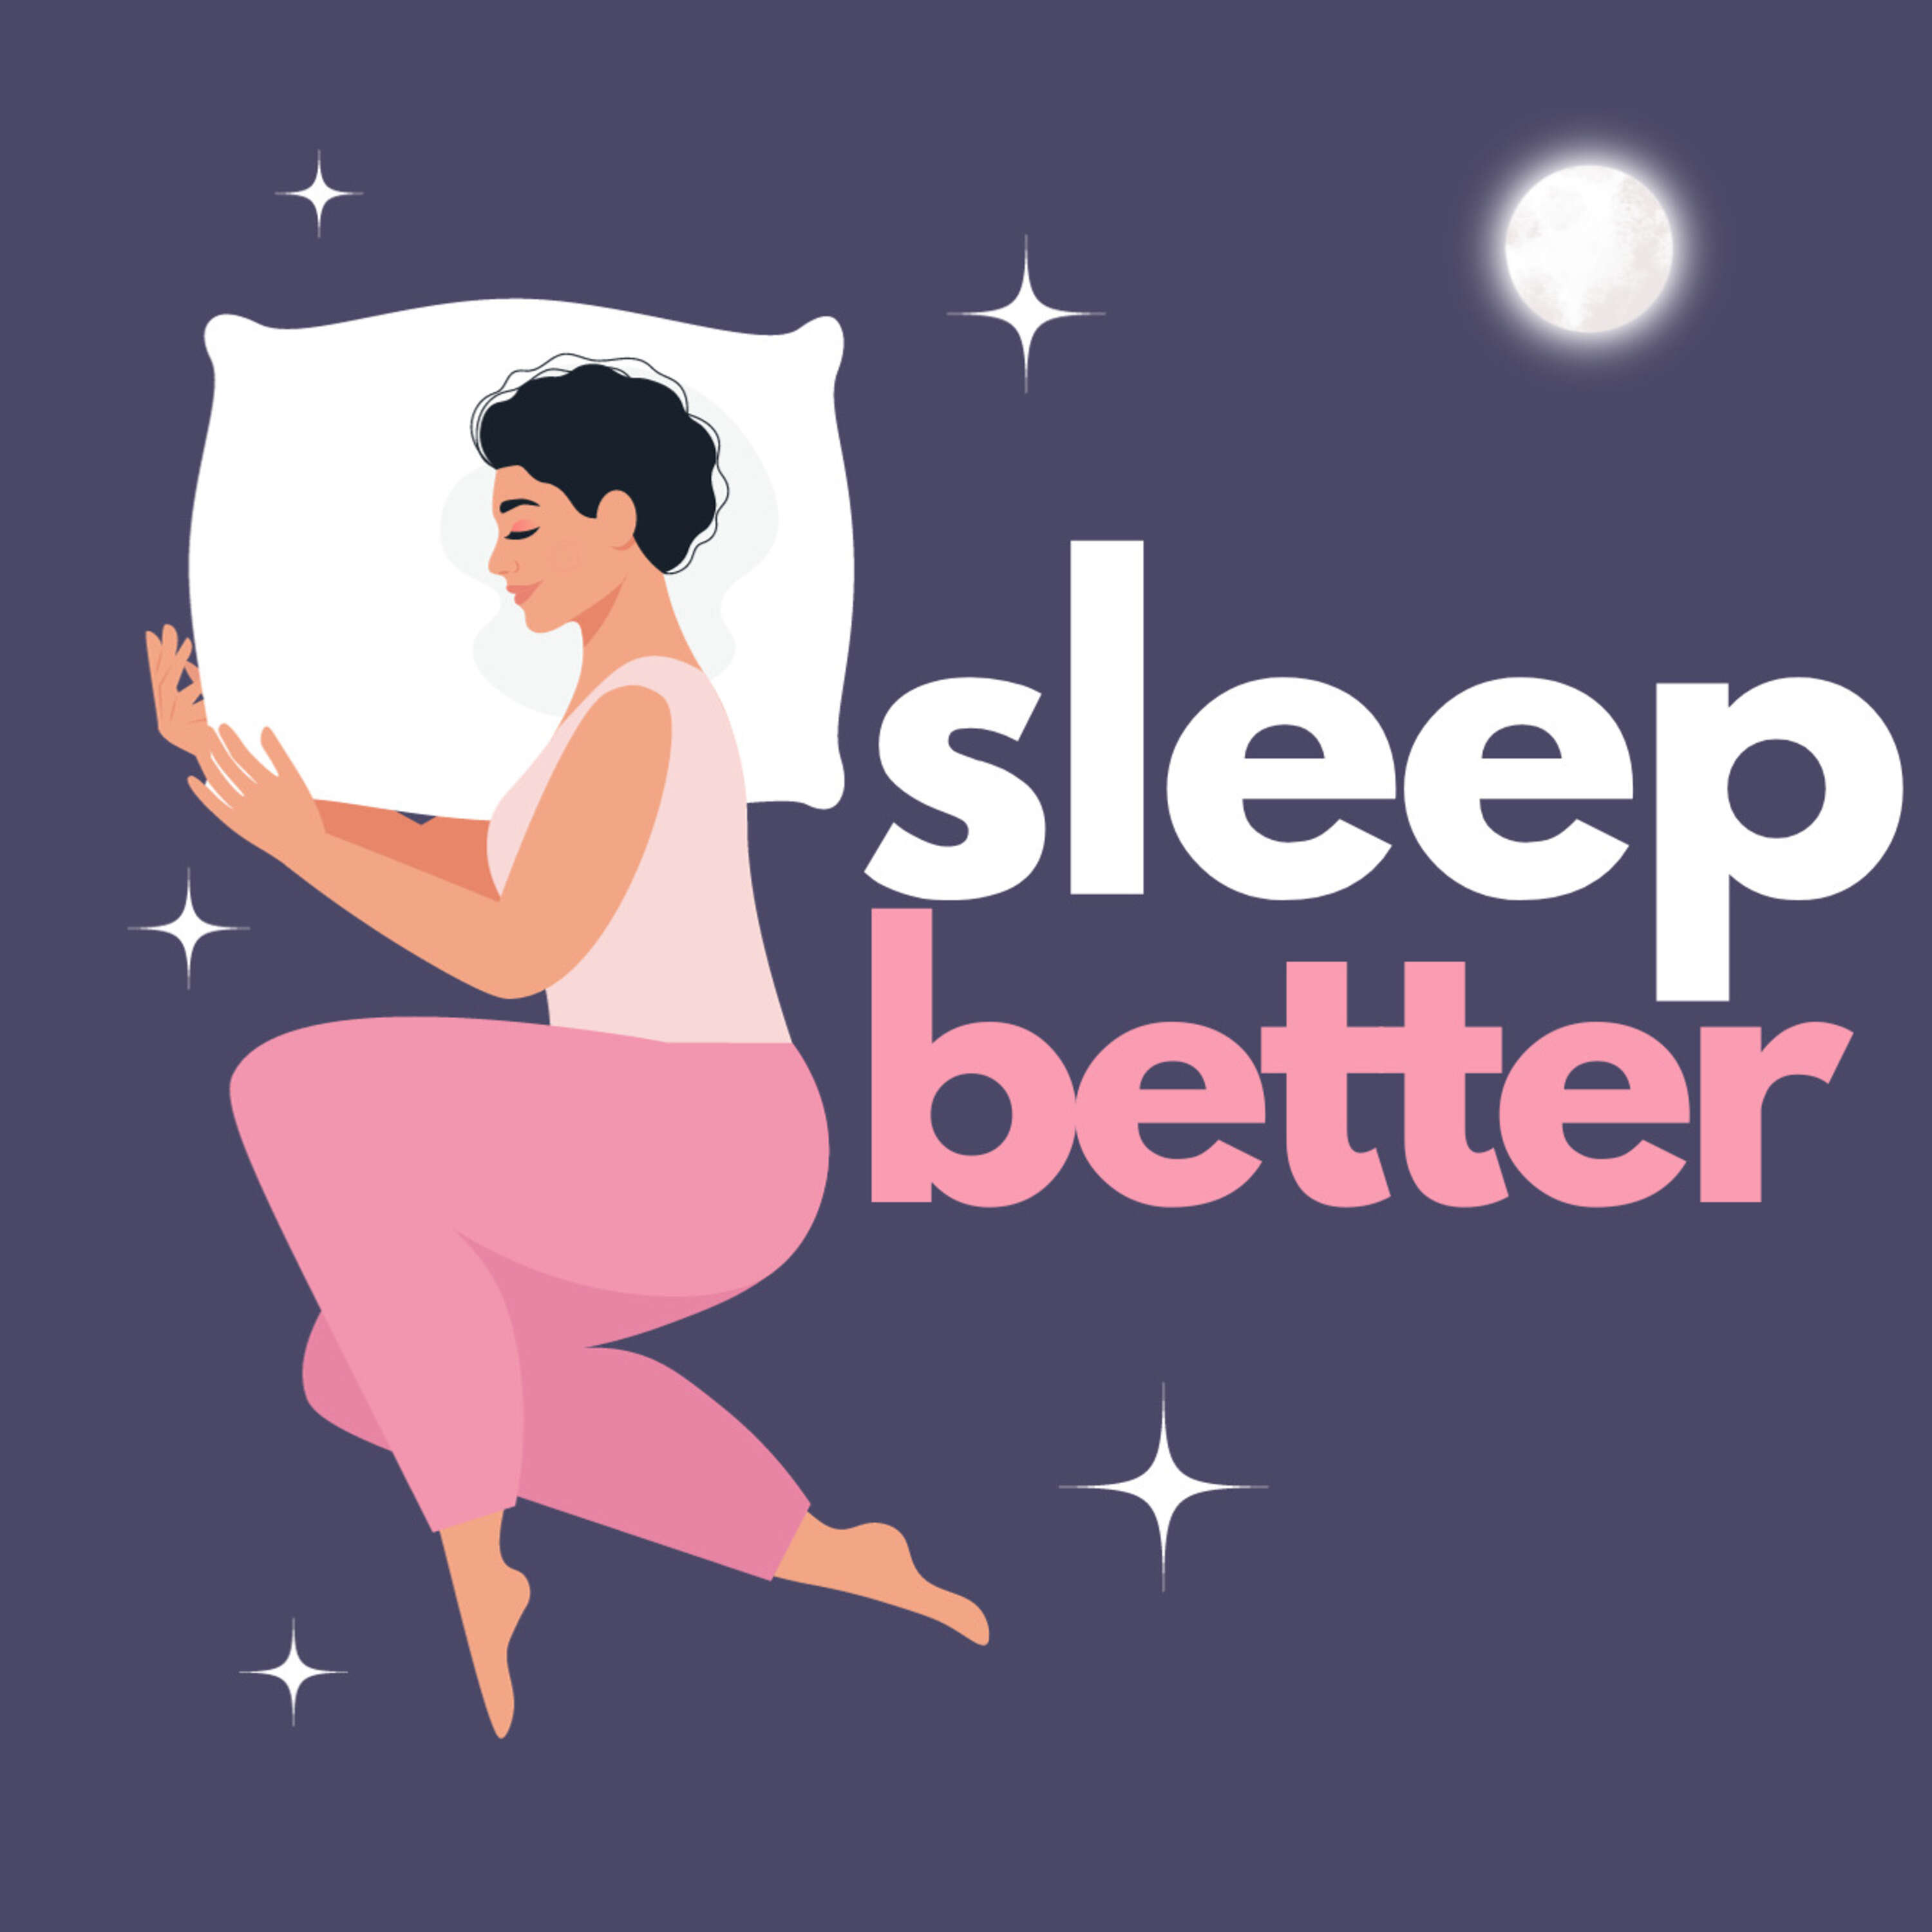 Insomnia No More: Fall Asleep Faster with the Right Music